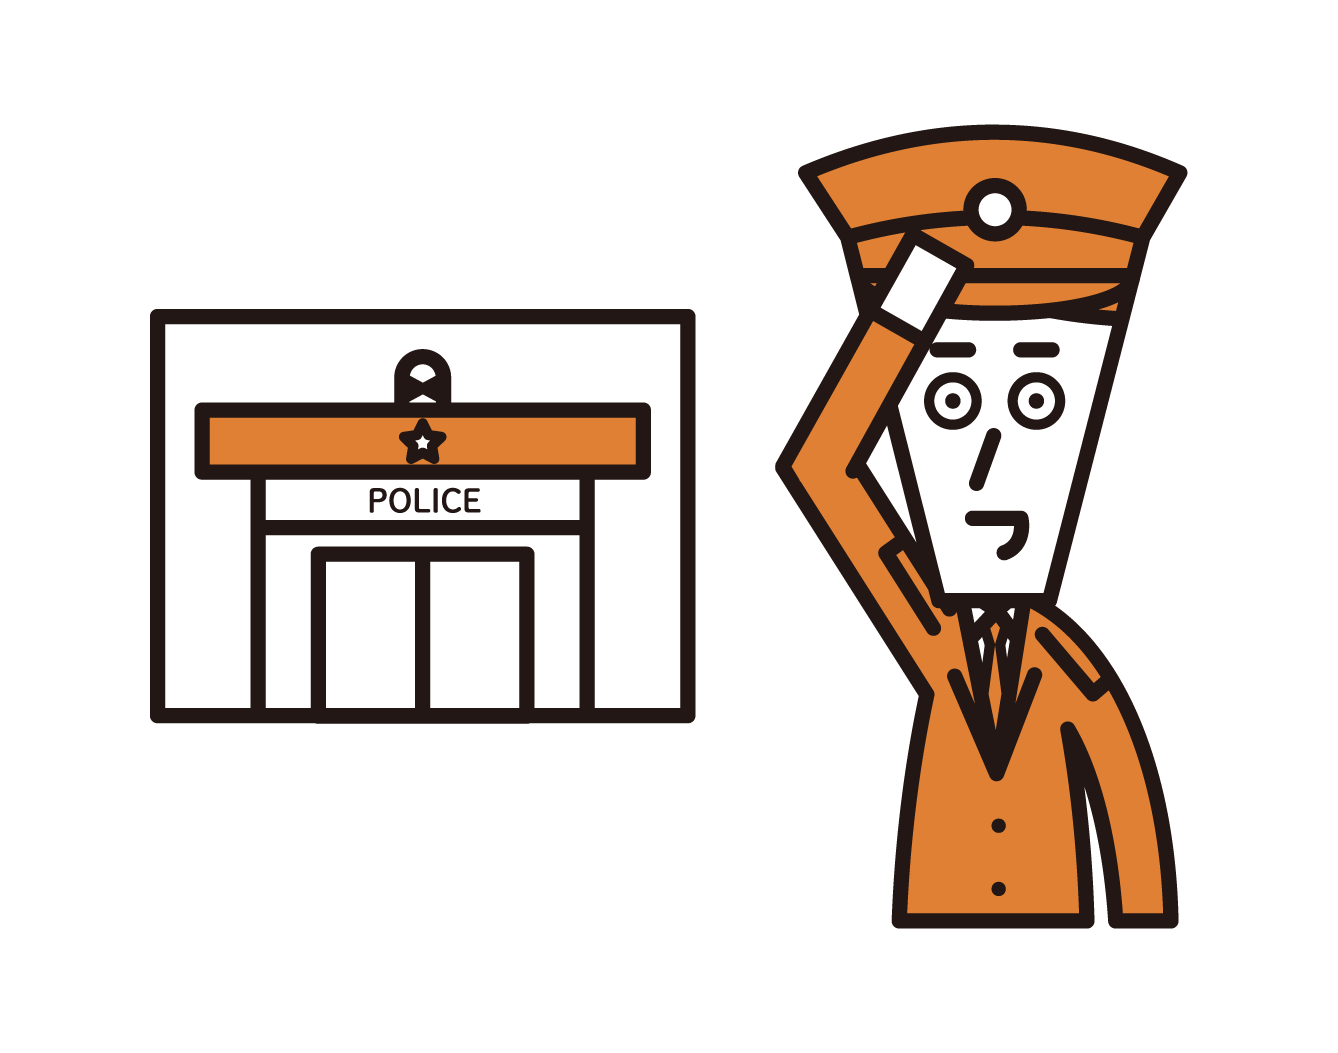 Illustration of a police officer (male) saluteing in front of a police box